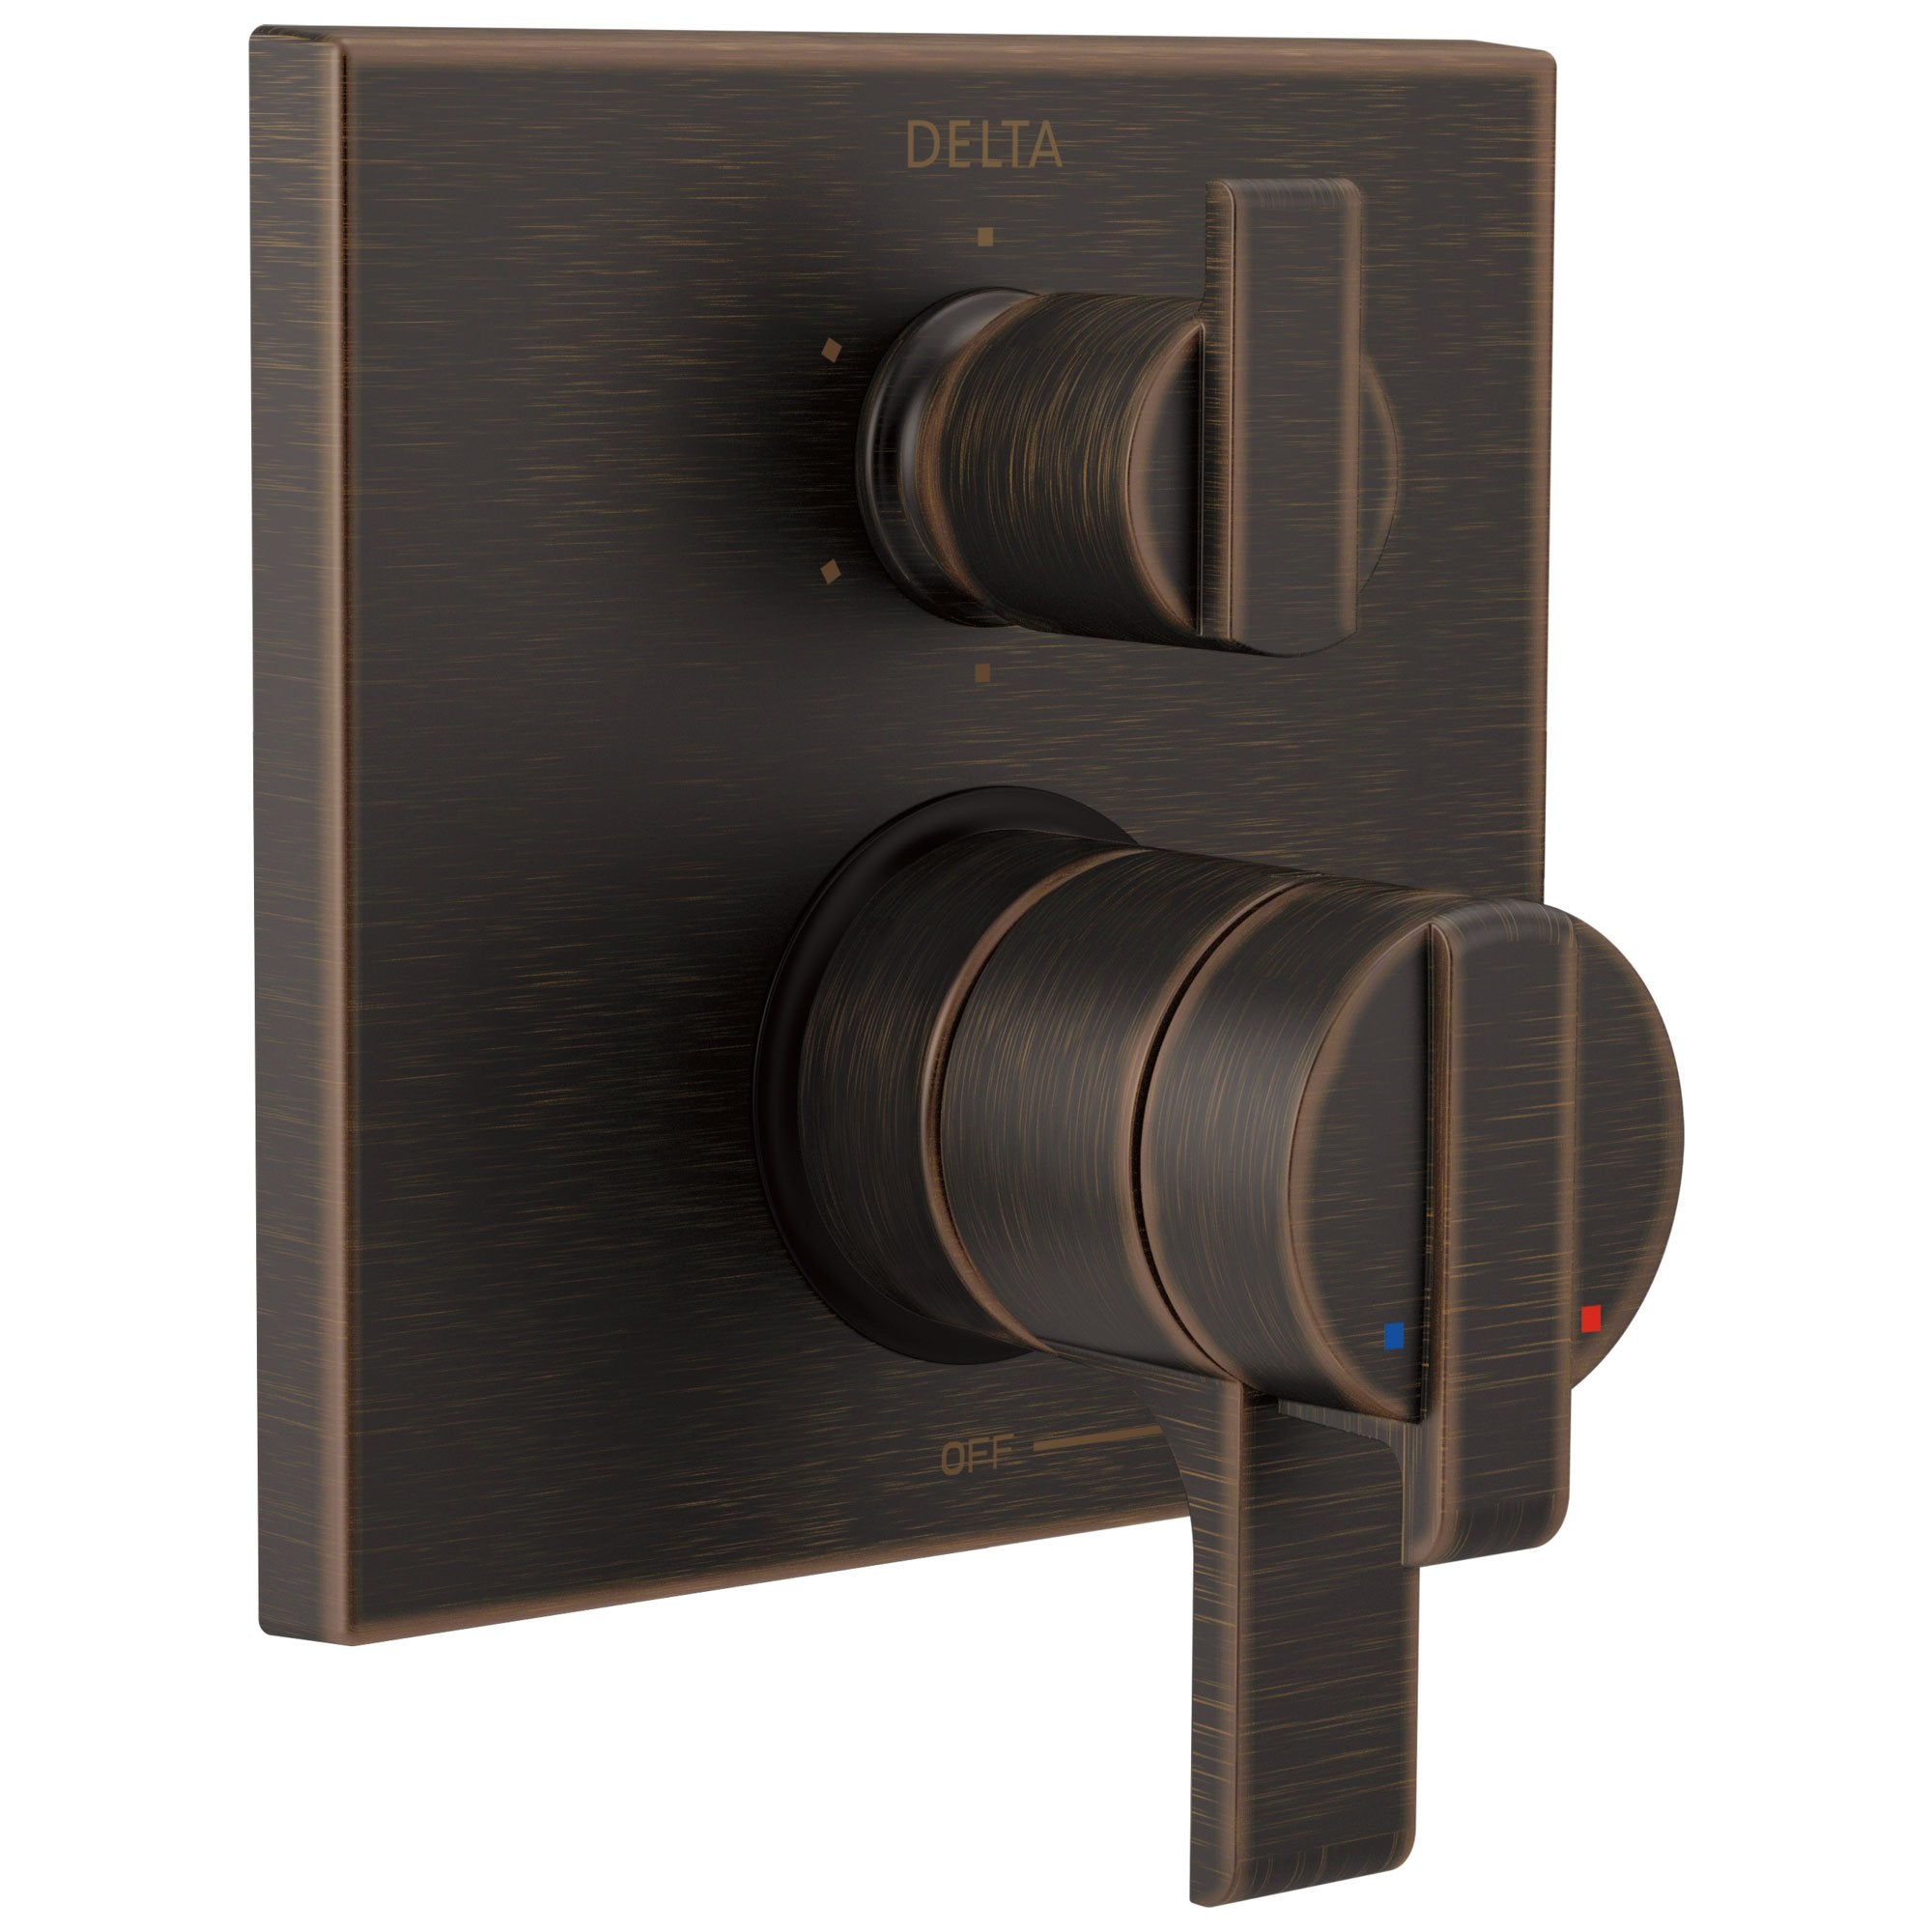 Delta Ara Venetian Bronze Modern Monitor 17 Shower Faucet Control Handle with 6-Setting Integrated Diverter Includes Trim Kit and Valve without Stops D2150V